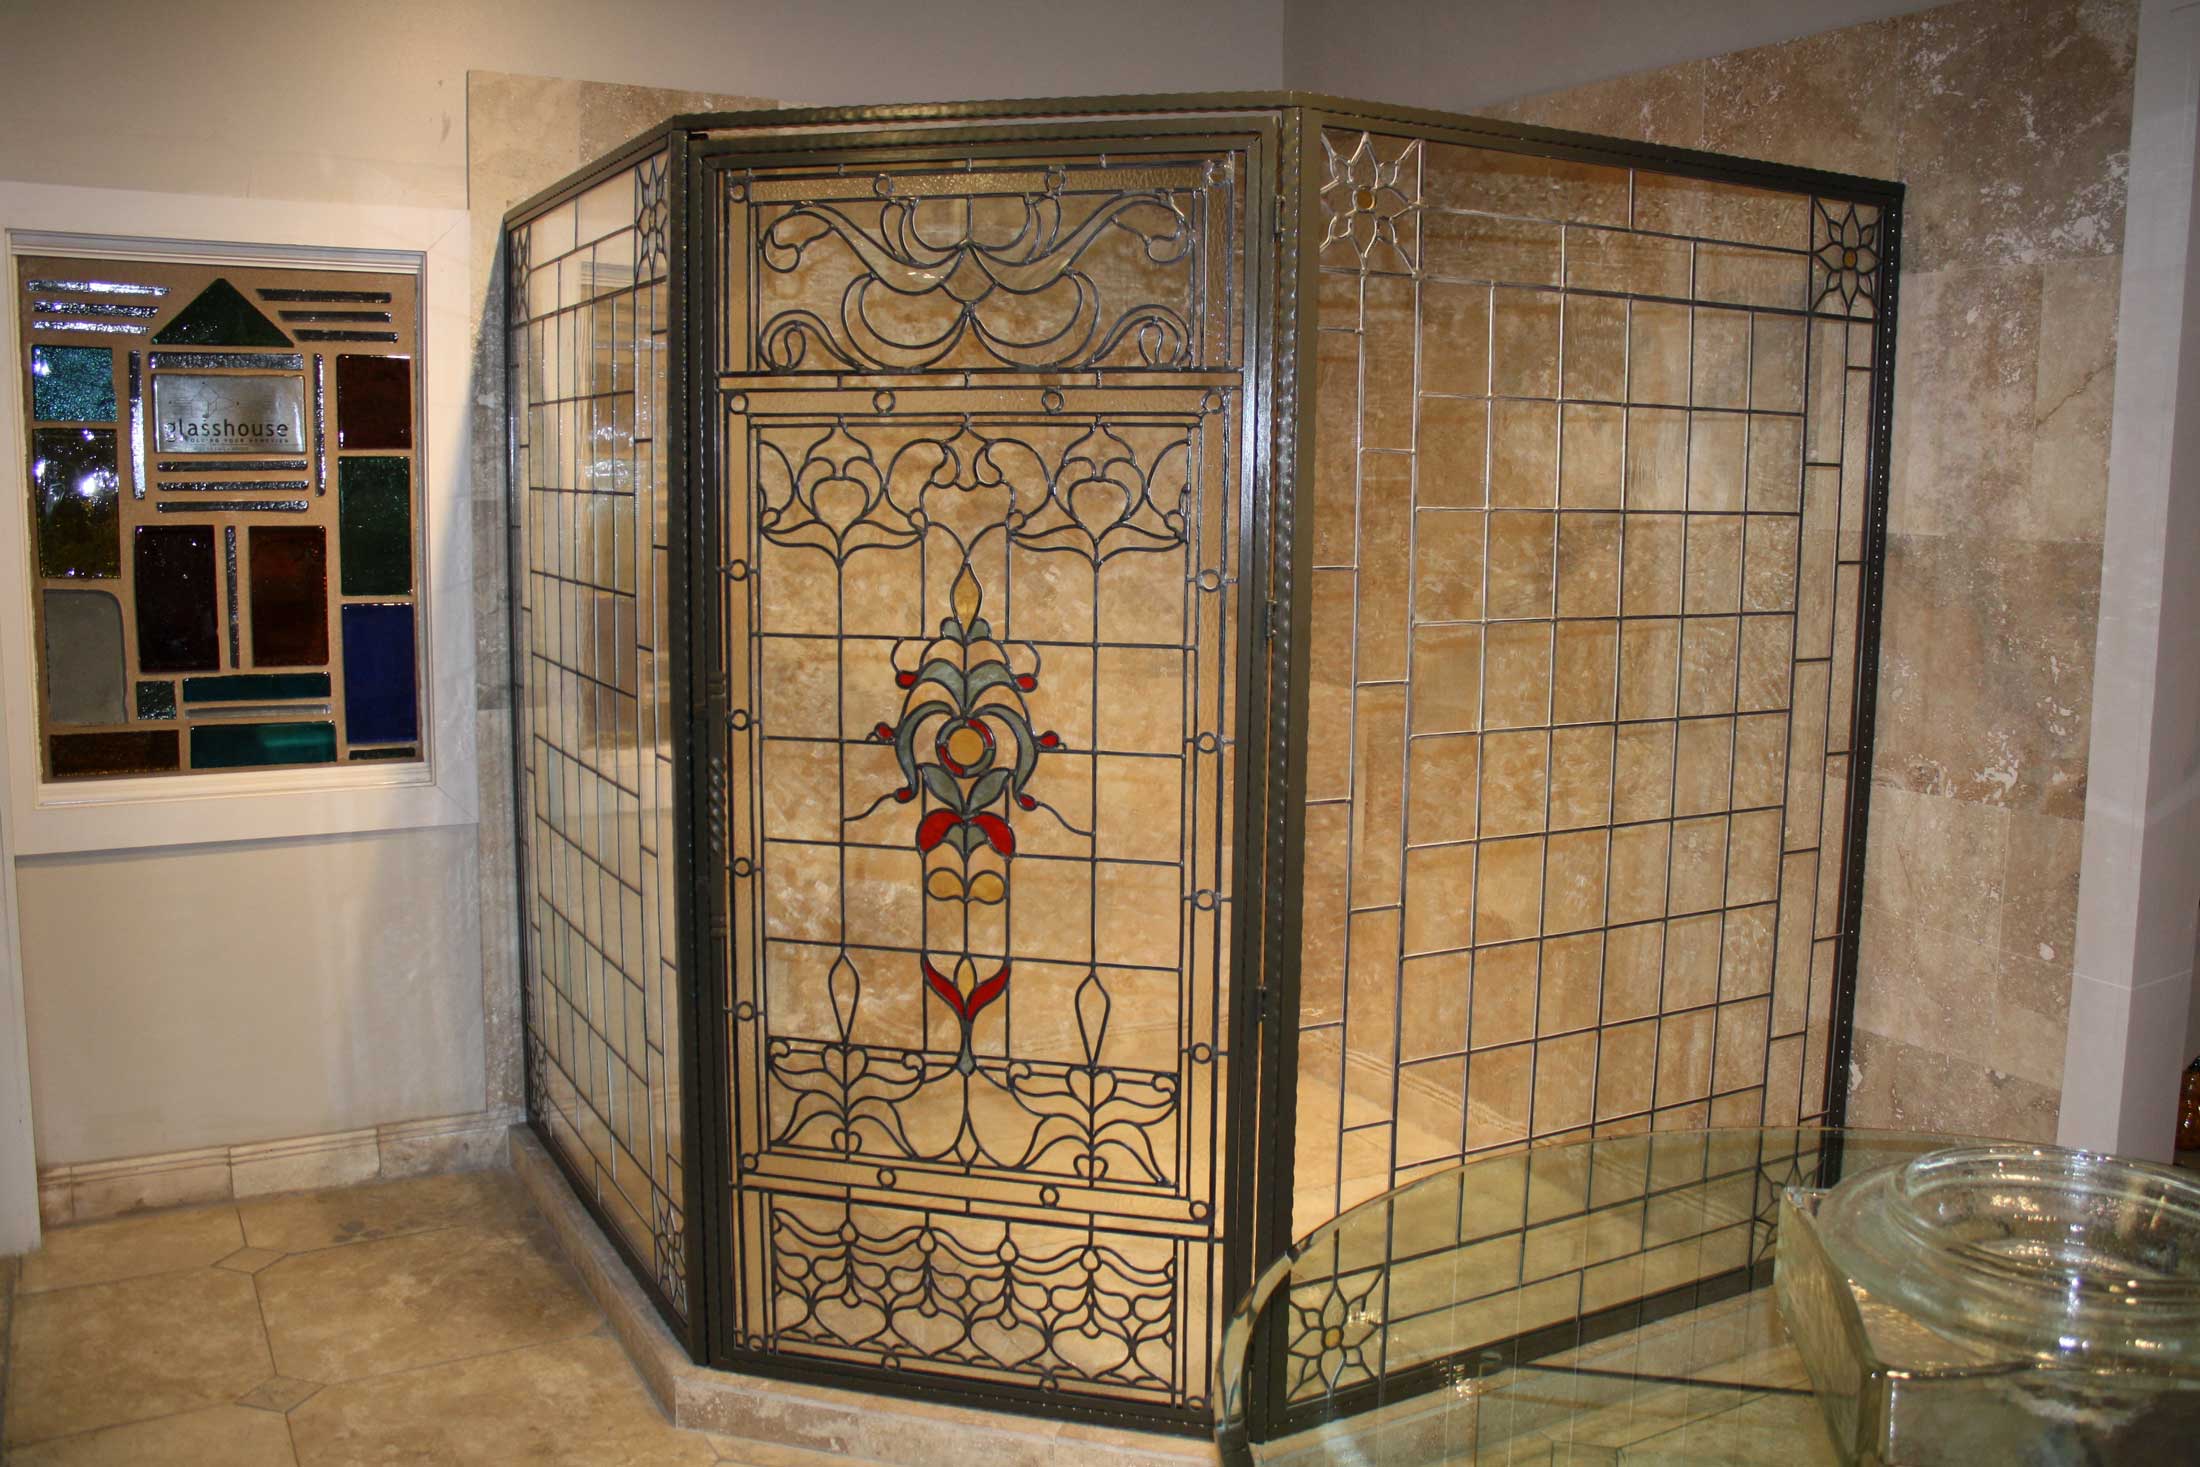 Beautiful glass shower doors with stained glass features